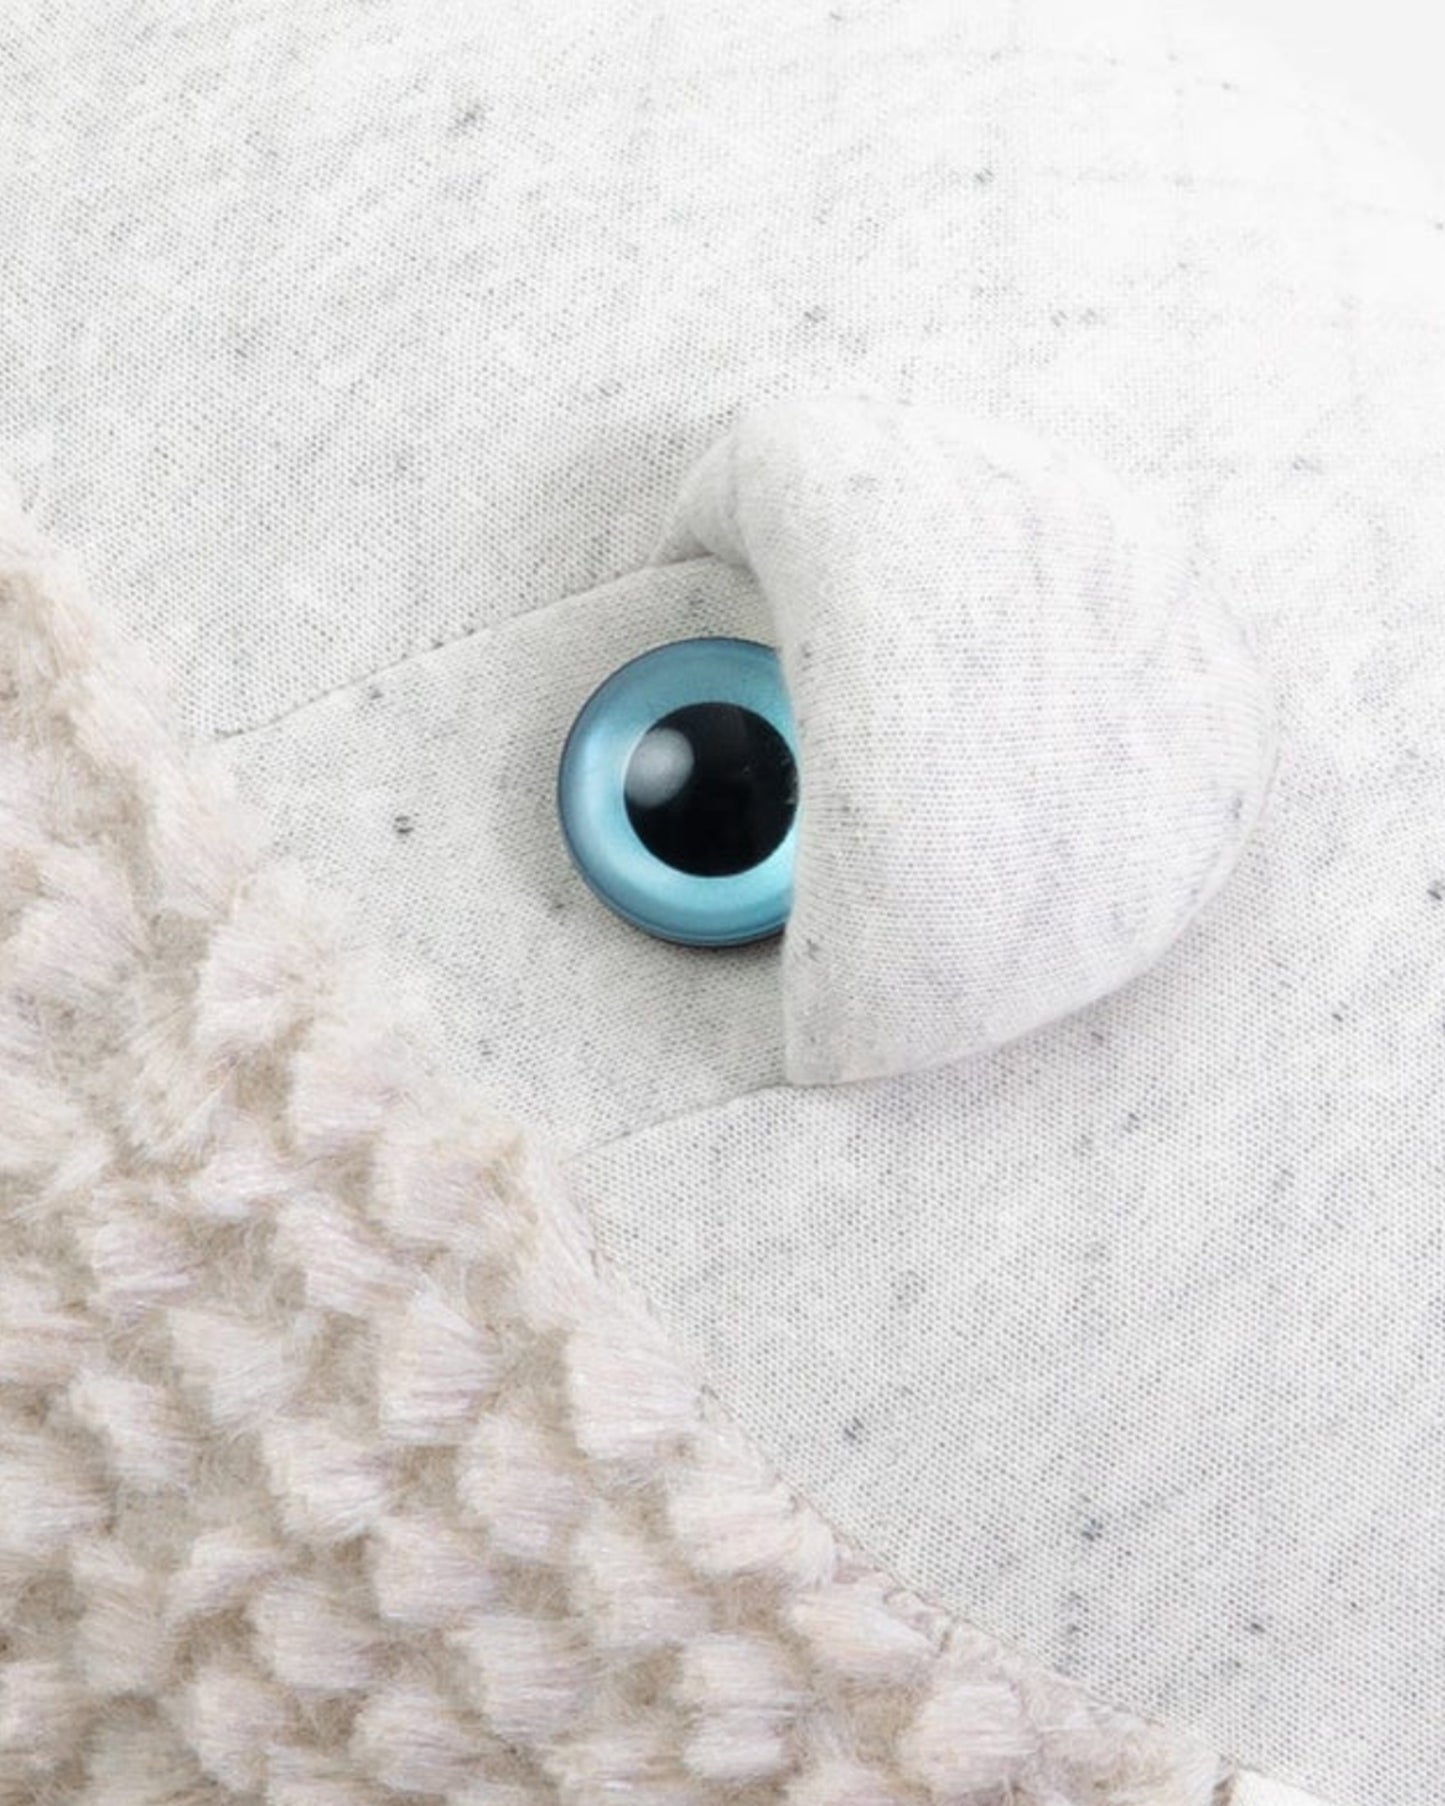 A light colored, wide-eyed whale to snuggle.